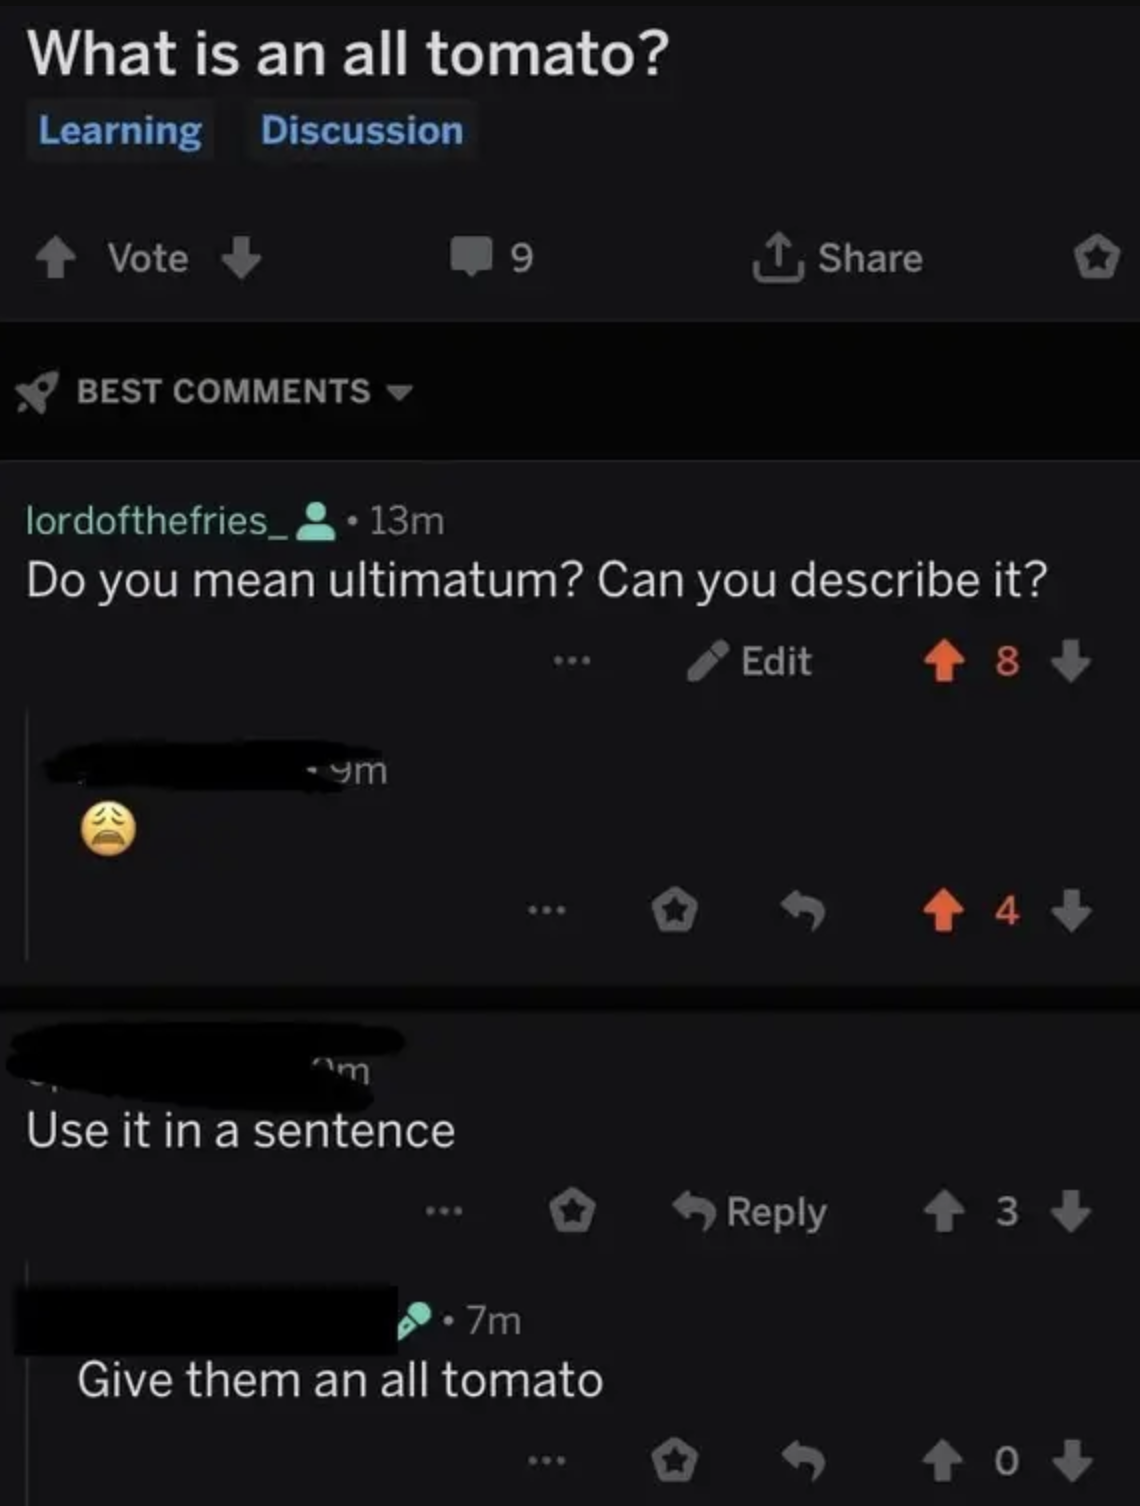 reddit post asking what an all tomato is but he means ultimatum 